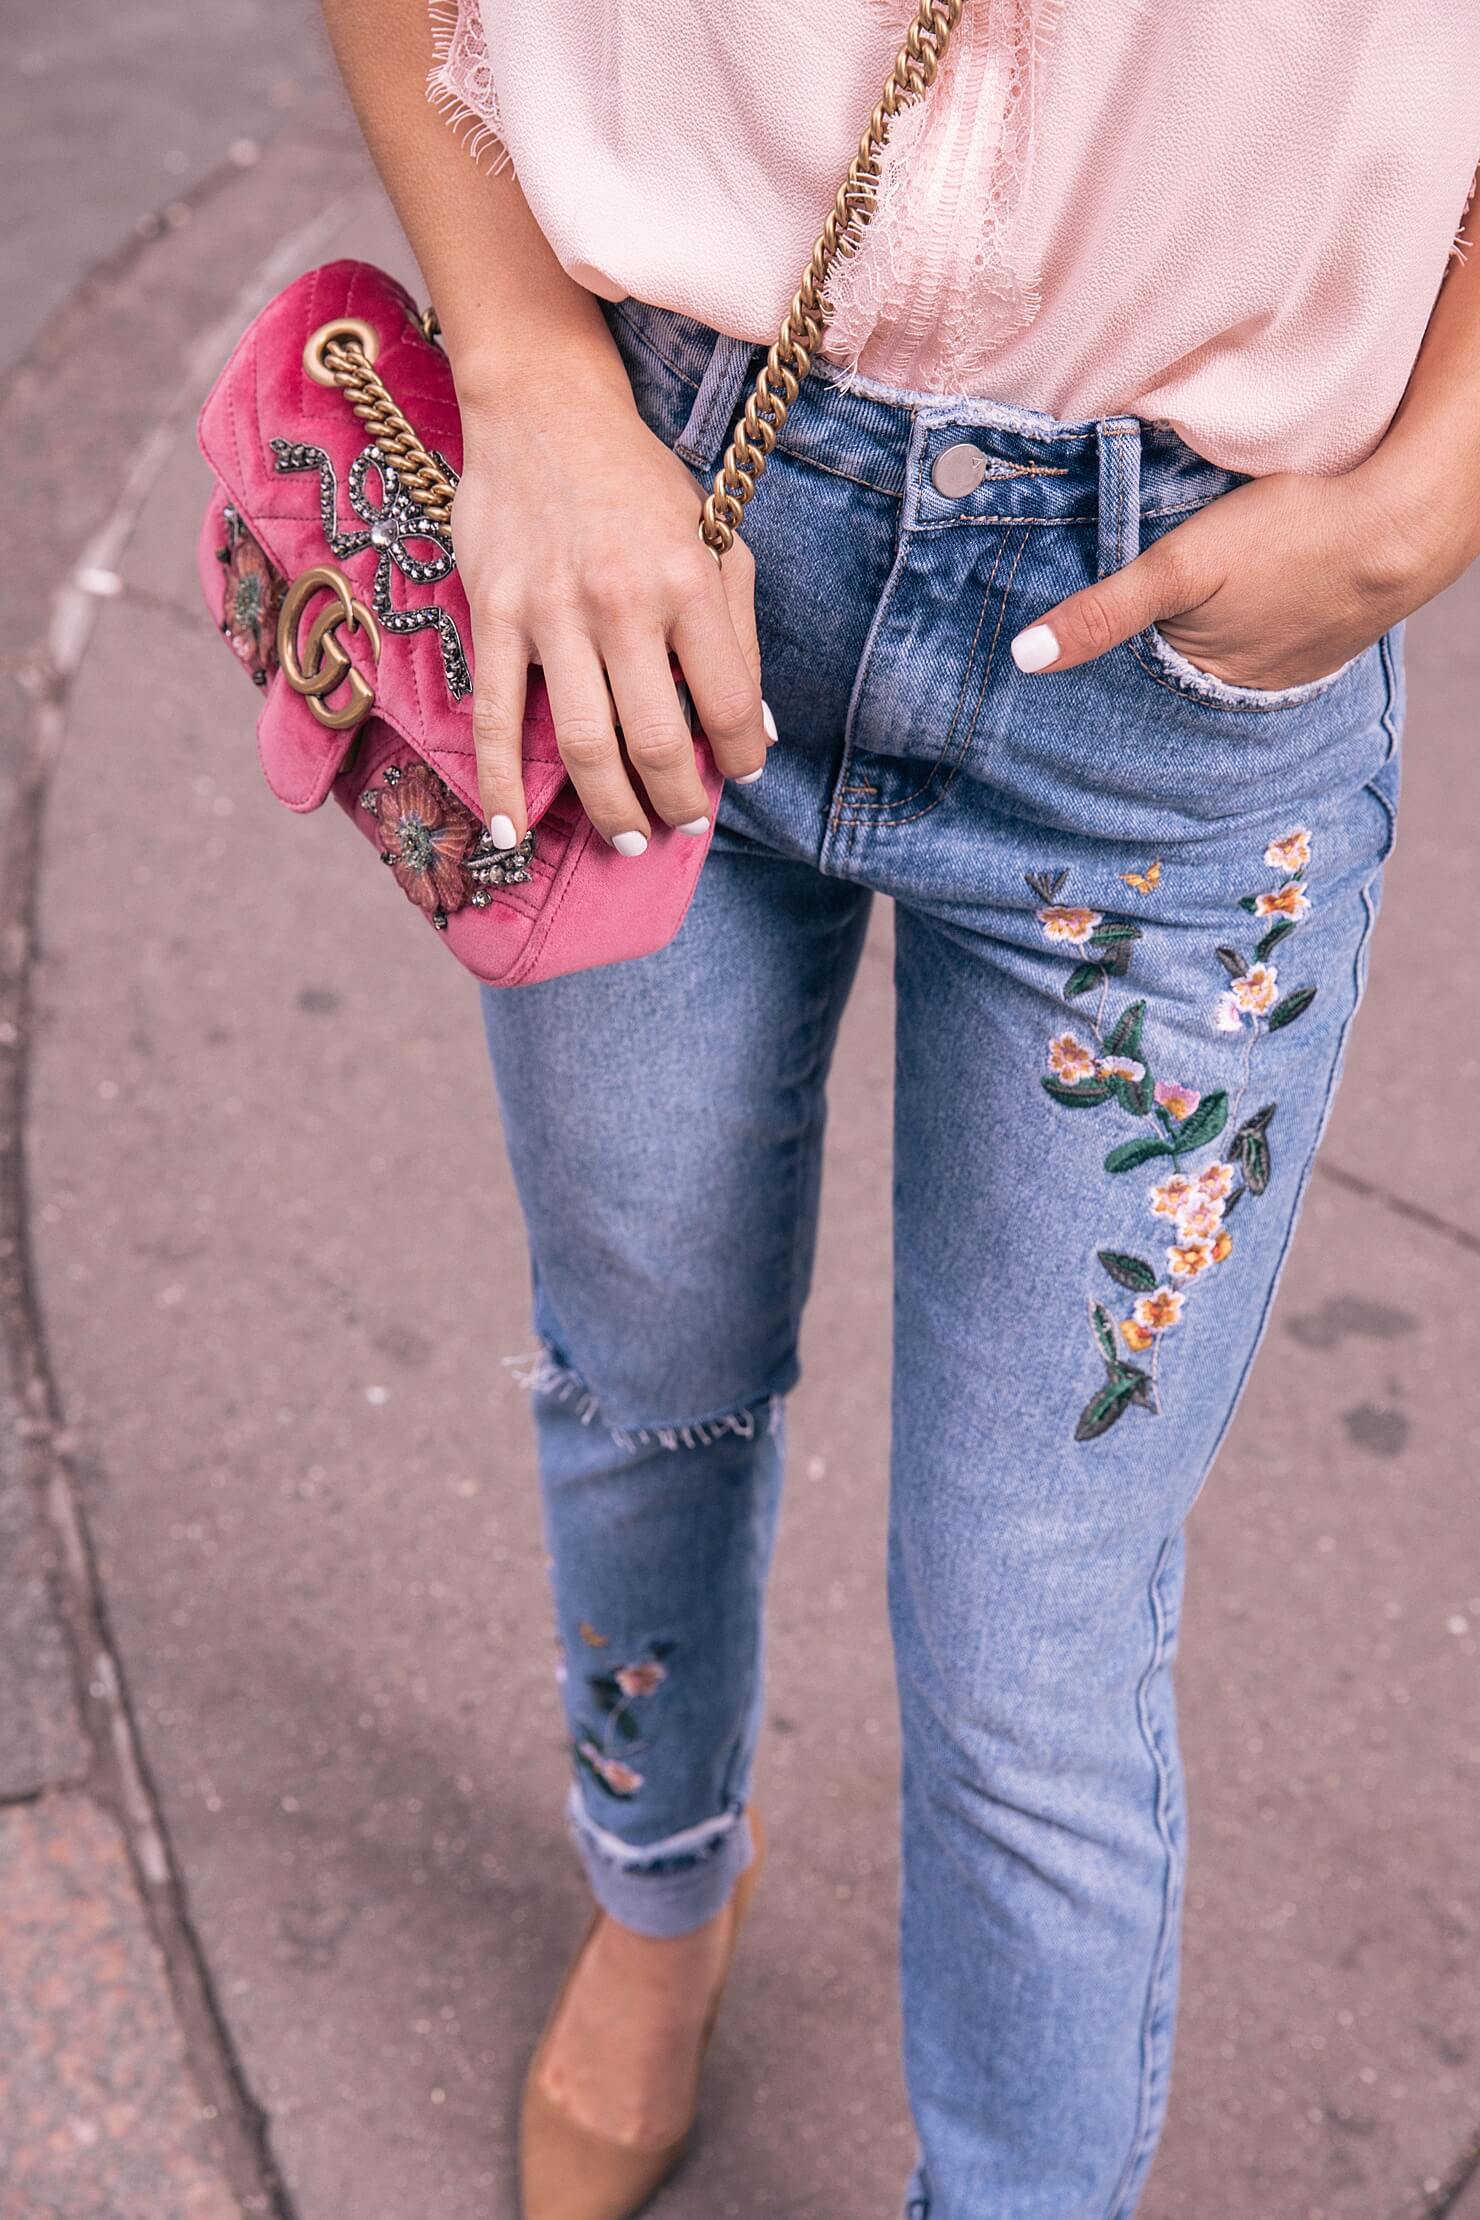 how to pull off mom jeans // brighton keller wearing rose embroidered jeans with lace sleepless blouse and Mini GG Marmont Matelassé Velvet Shoulder Bag with dee keller portia pumps in cognac suede